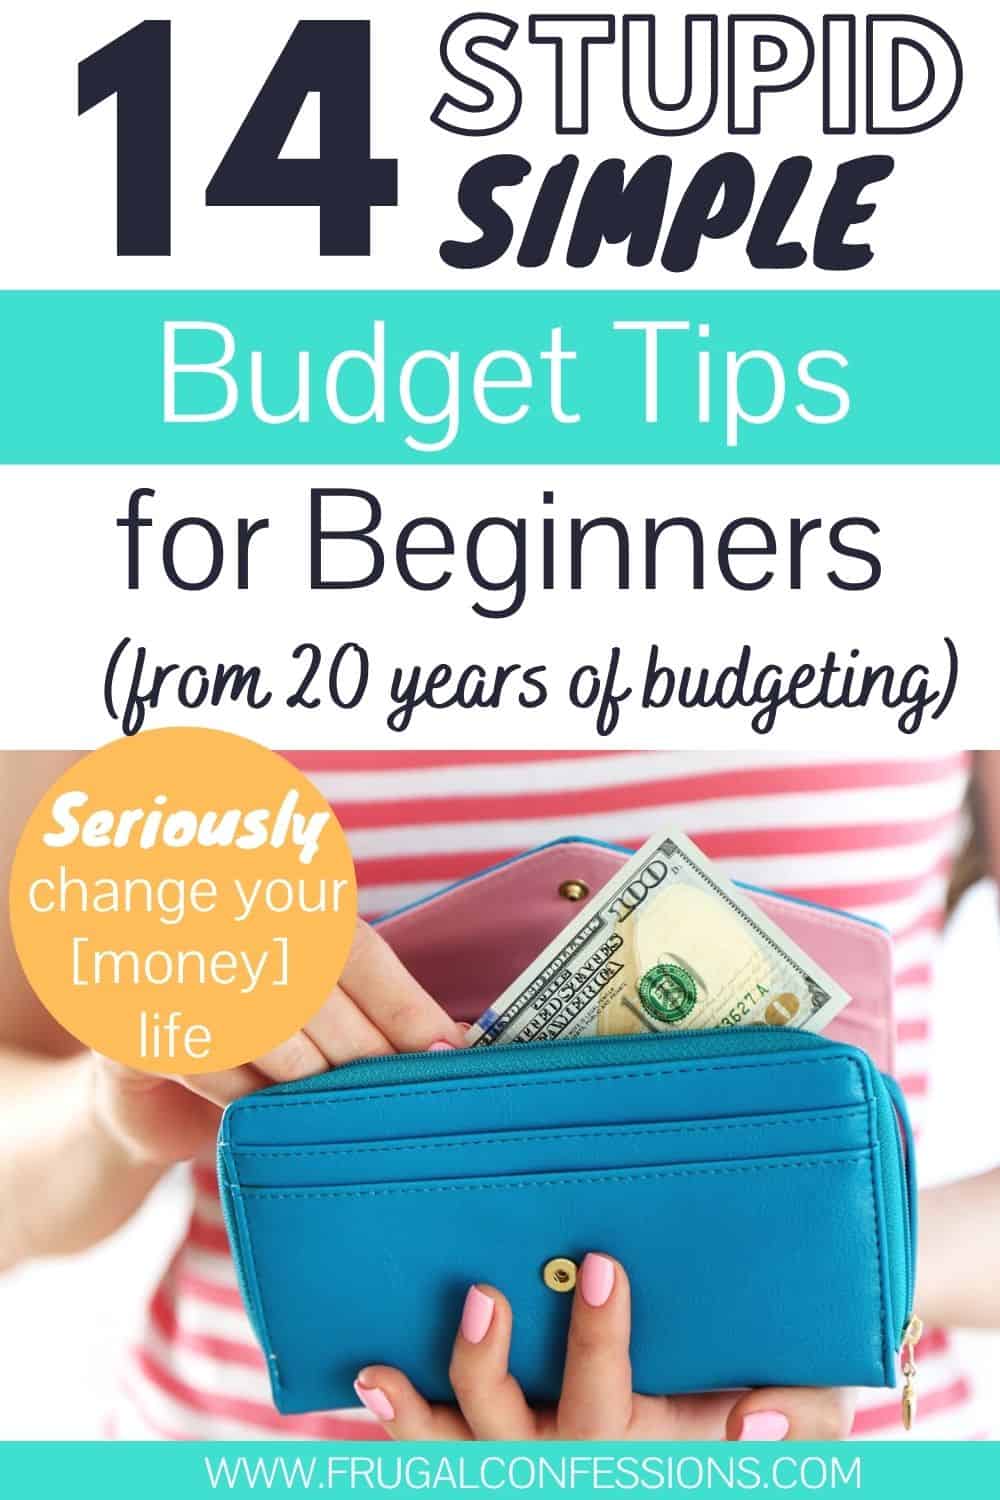 woman in red striped shirt holding wallet of money, text overlay "14 stupid simple budget tips for beginners from 20 years of budgeting"